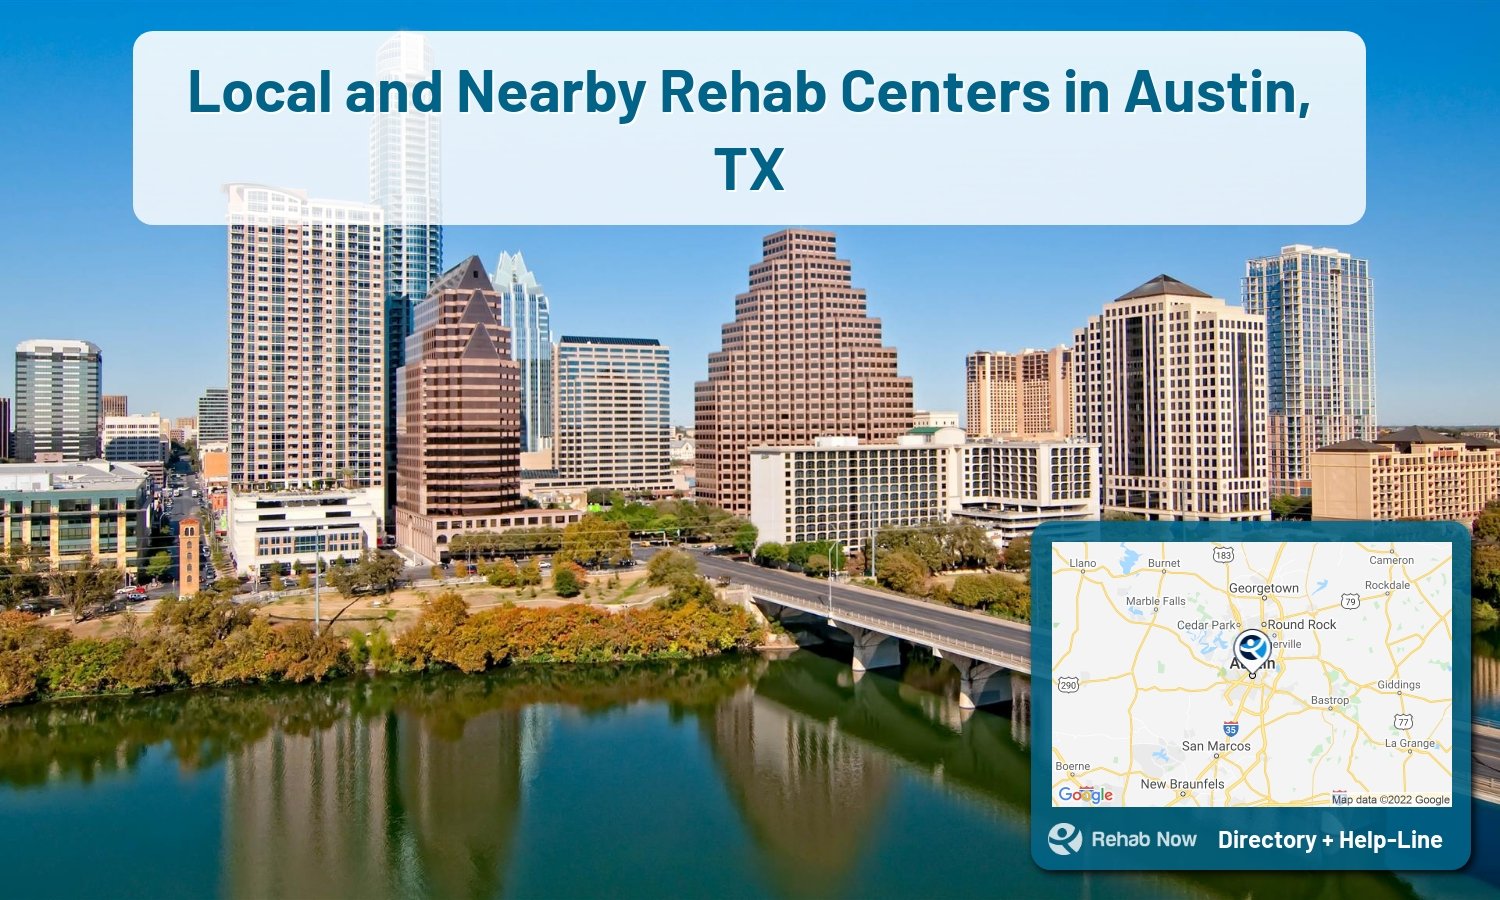 Austin, TX Treatment Centers. Find drug rehab in Austin, Texas, or detox and treatment programs. Get the right help now!